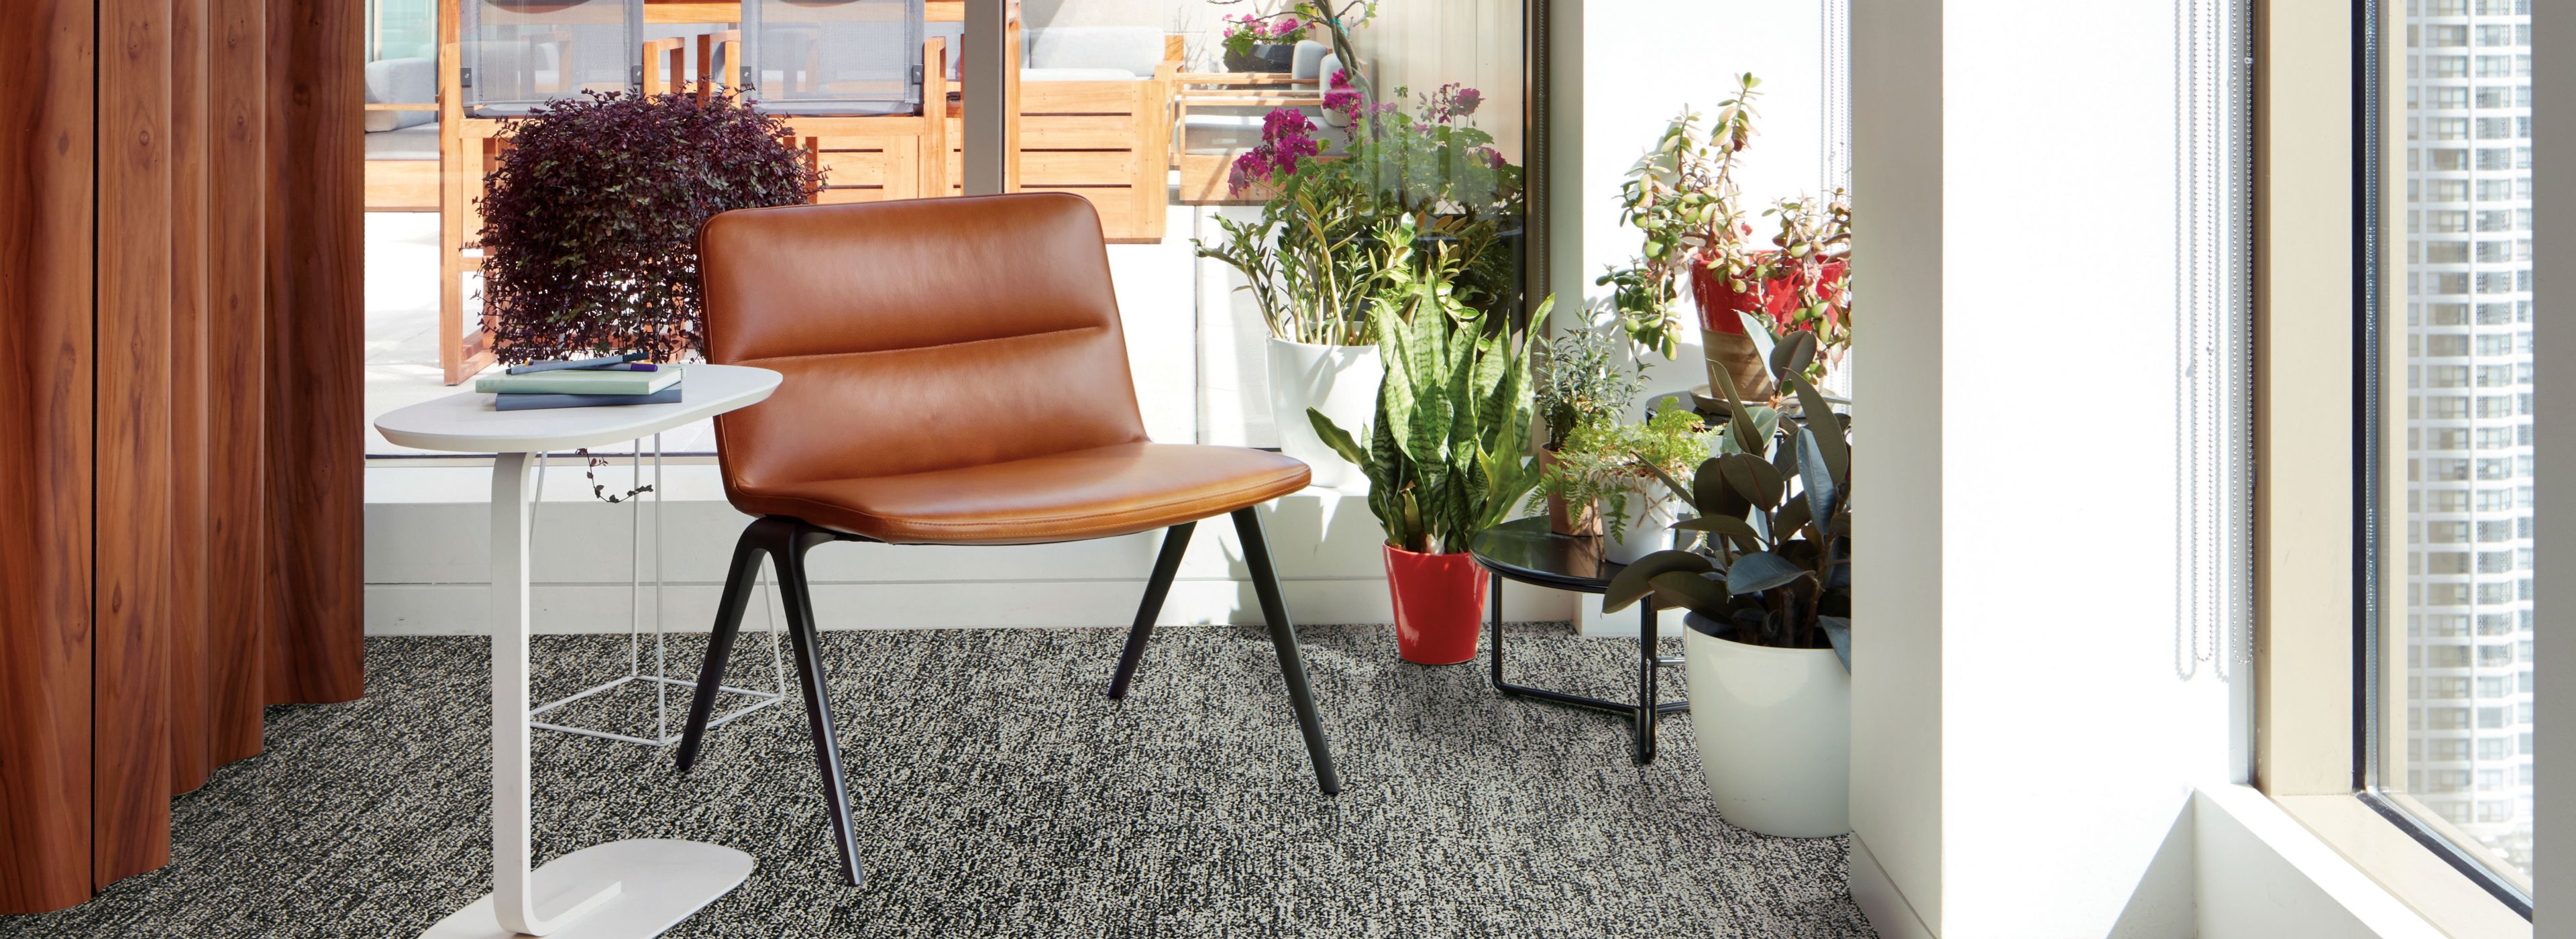 Interface Obligato plank carpet tile with leather chair and potted plants in windows imagen número 1